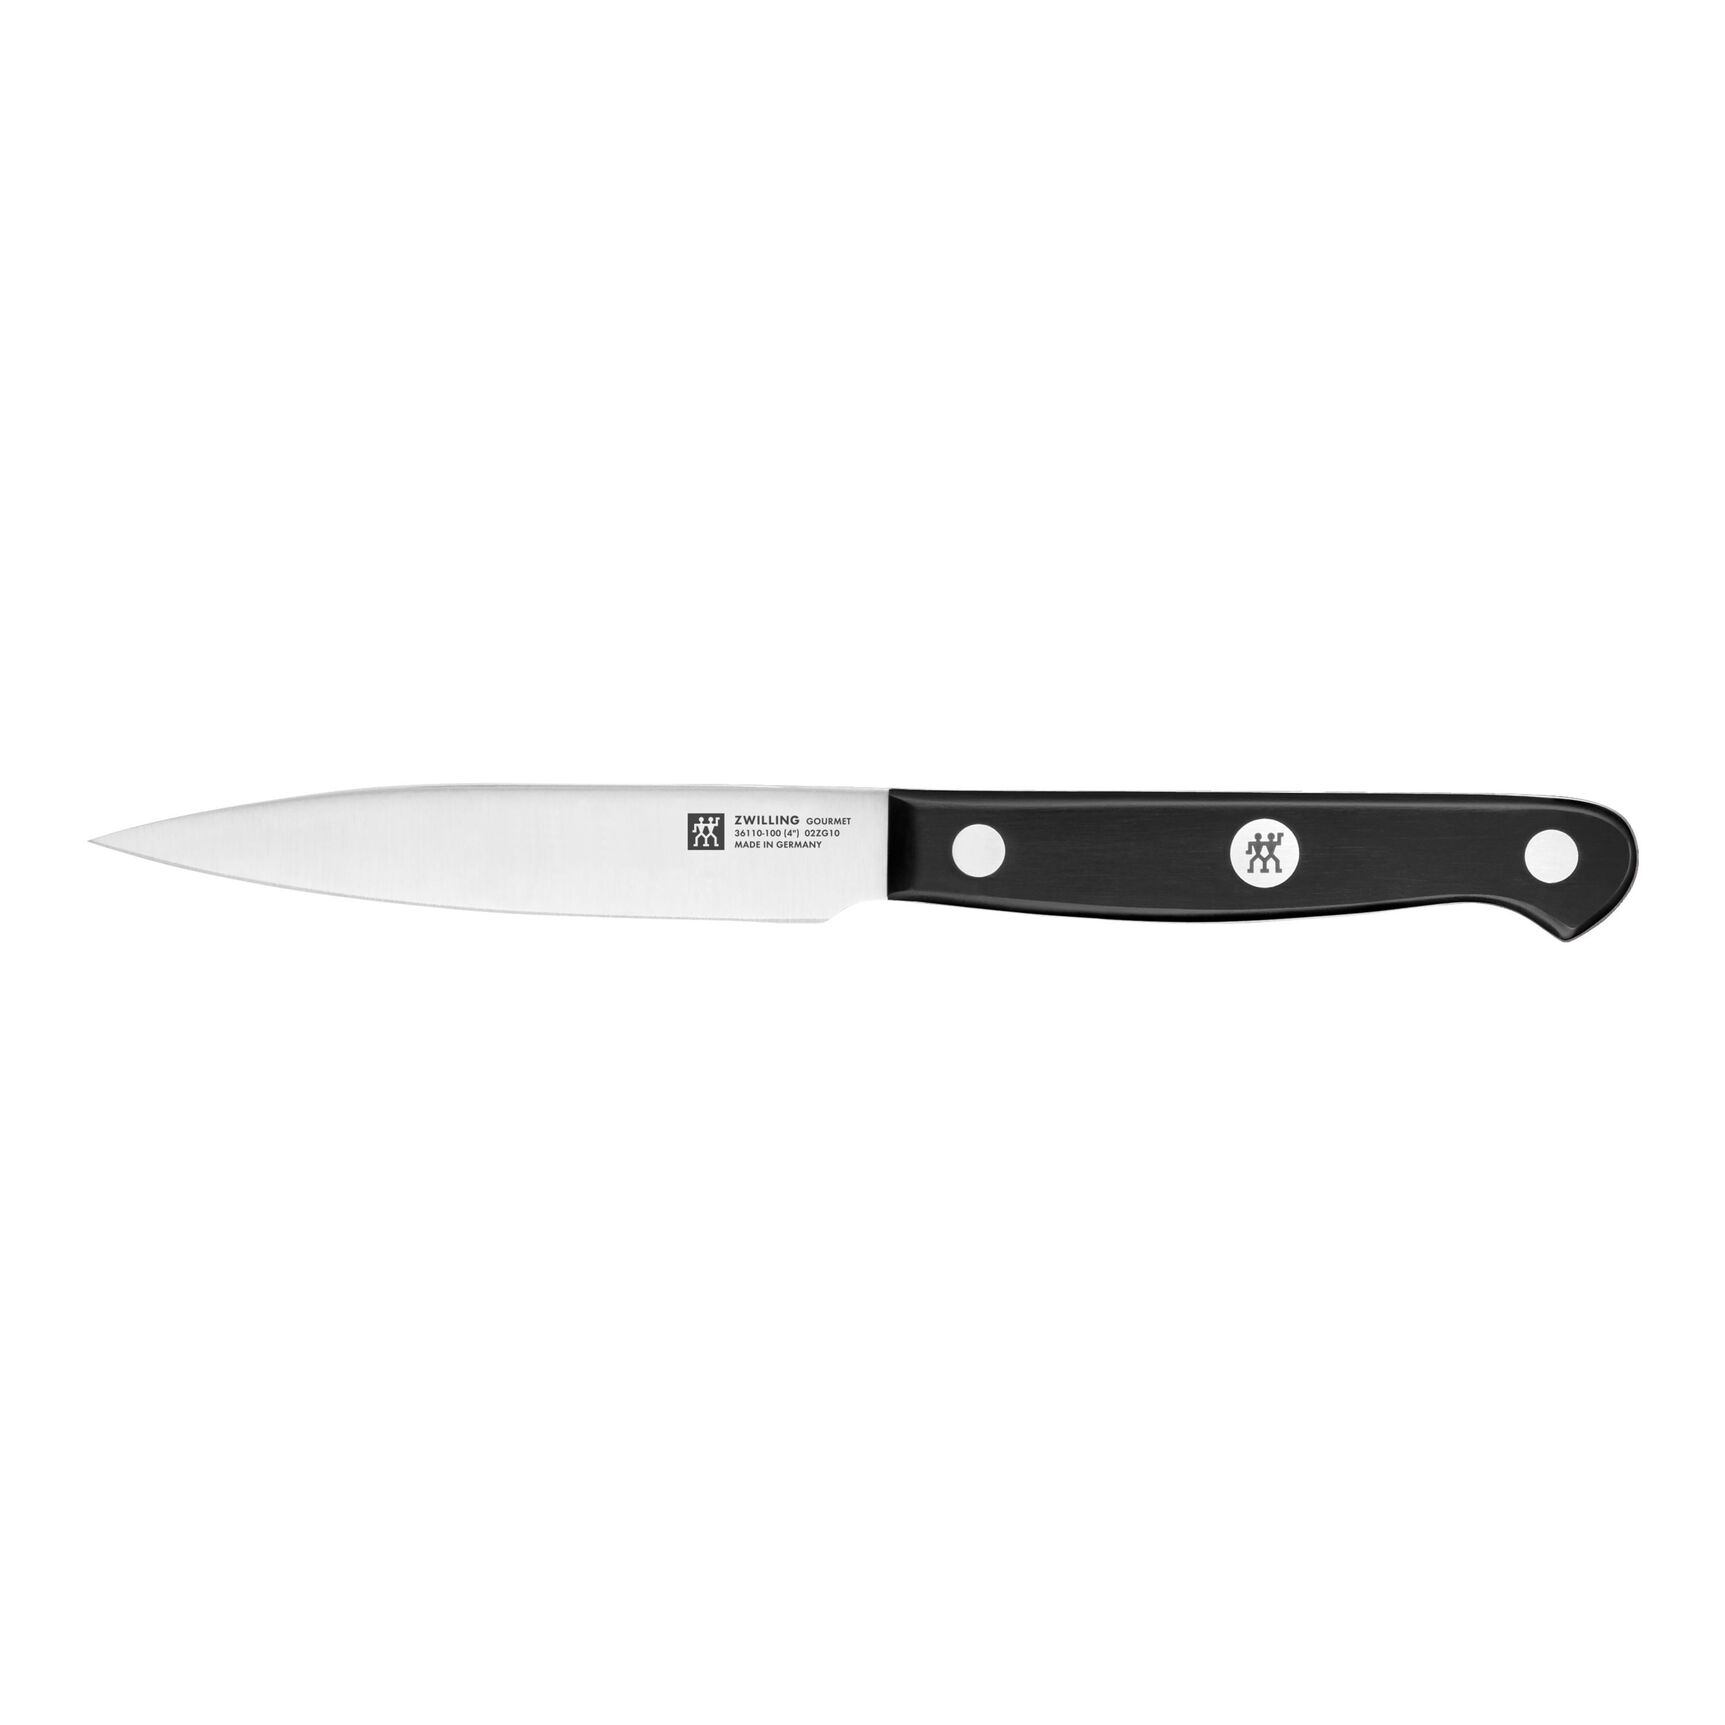 Zwilling Gourmet 10cm Paring Knife